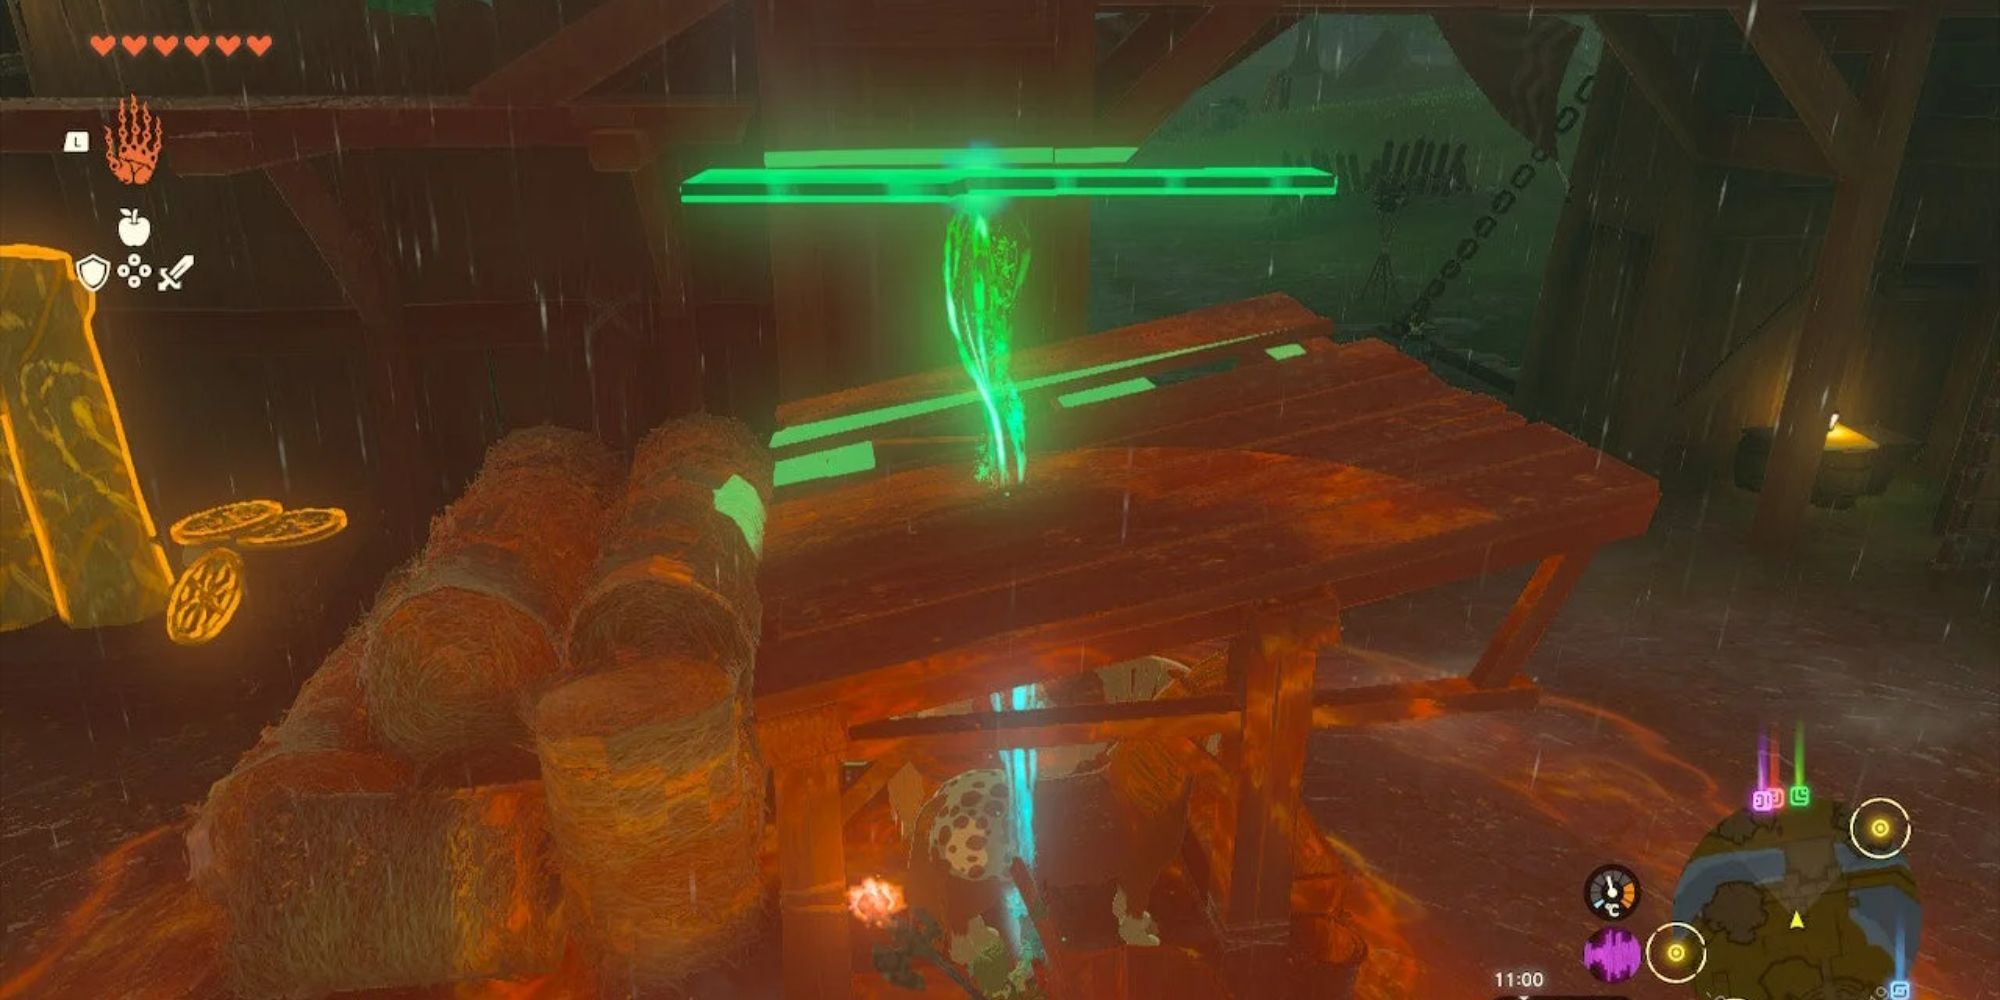 Link using Ultrahand to fix the Lookout Landing stable